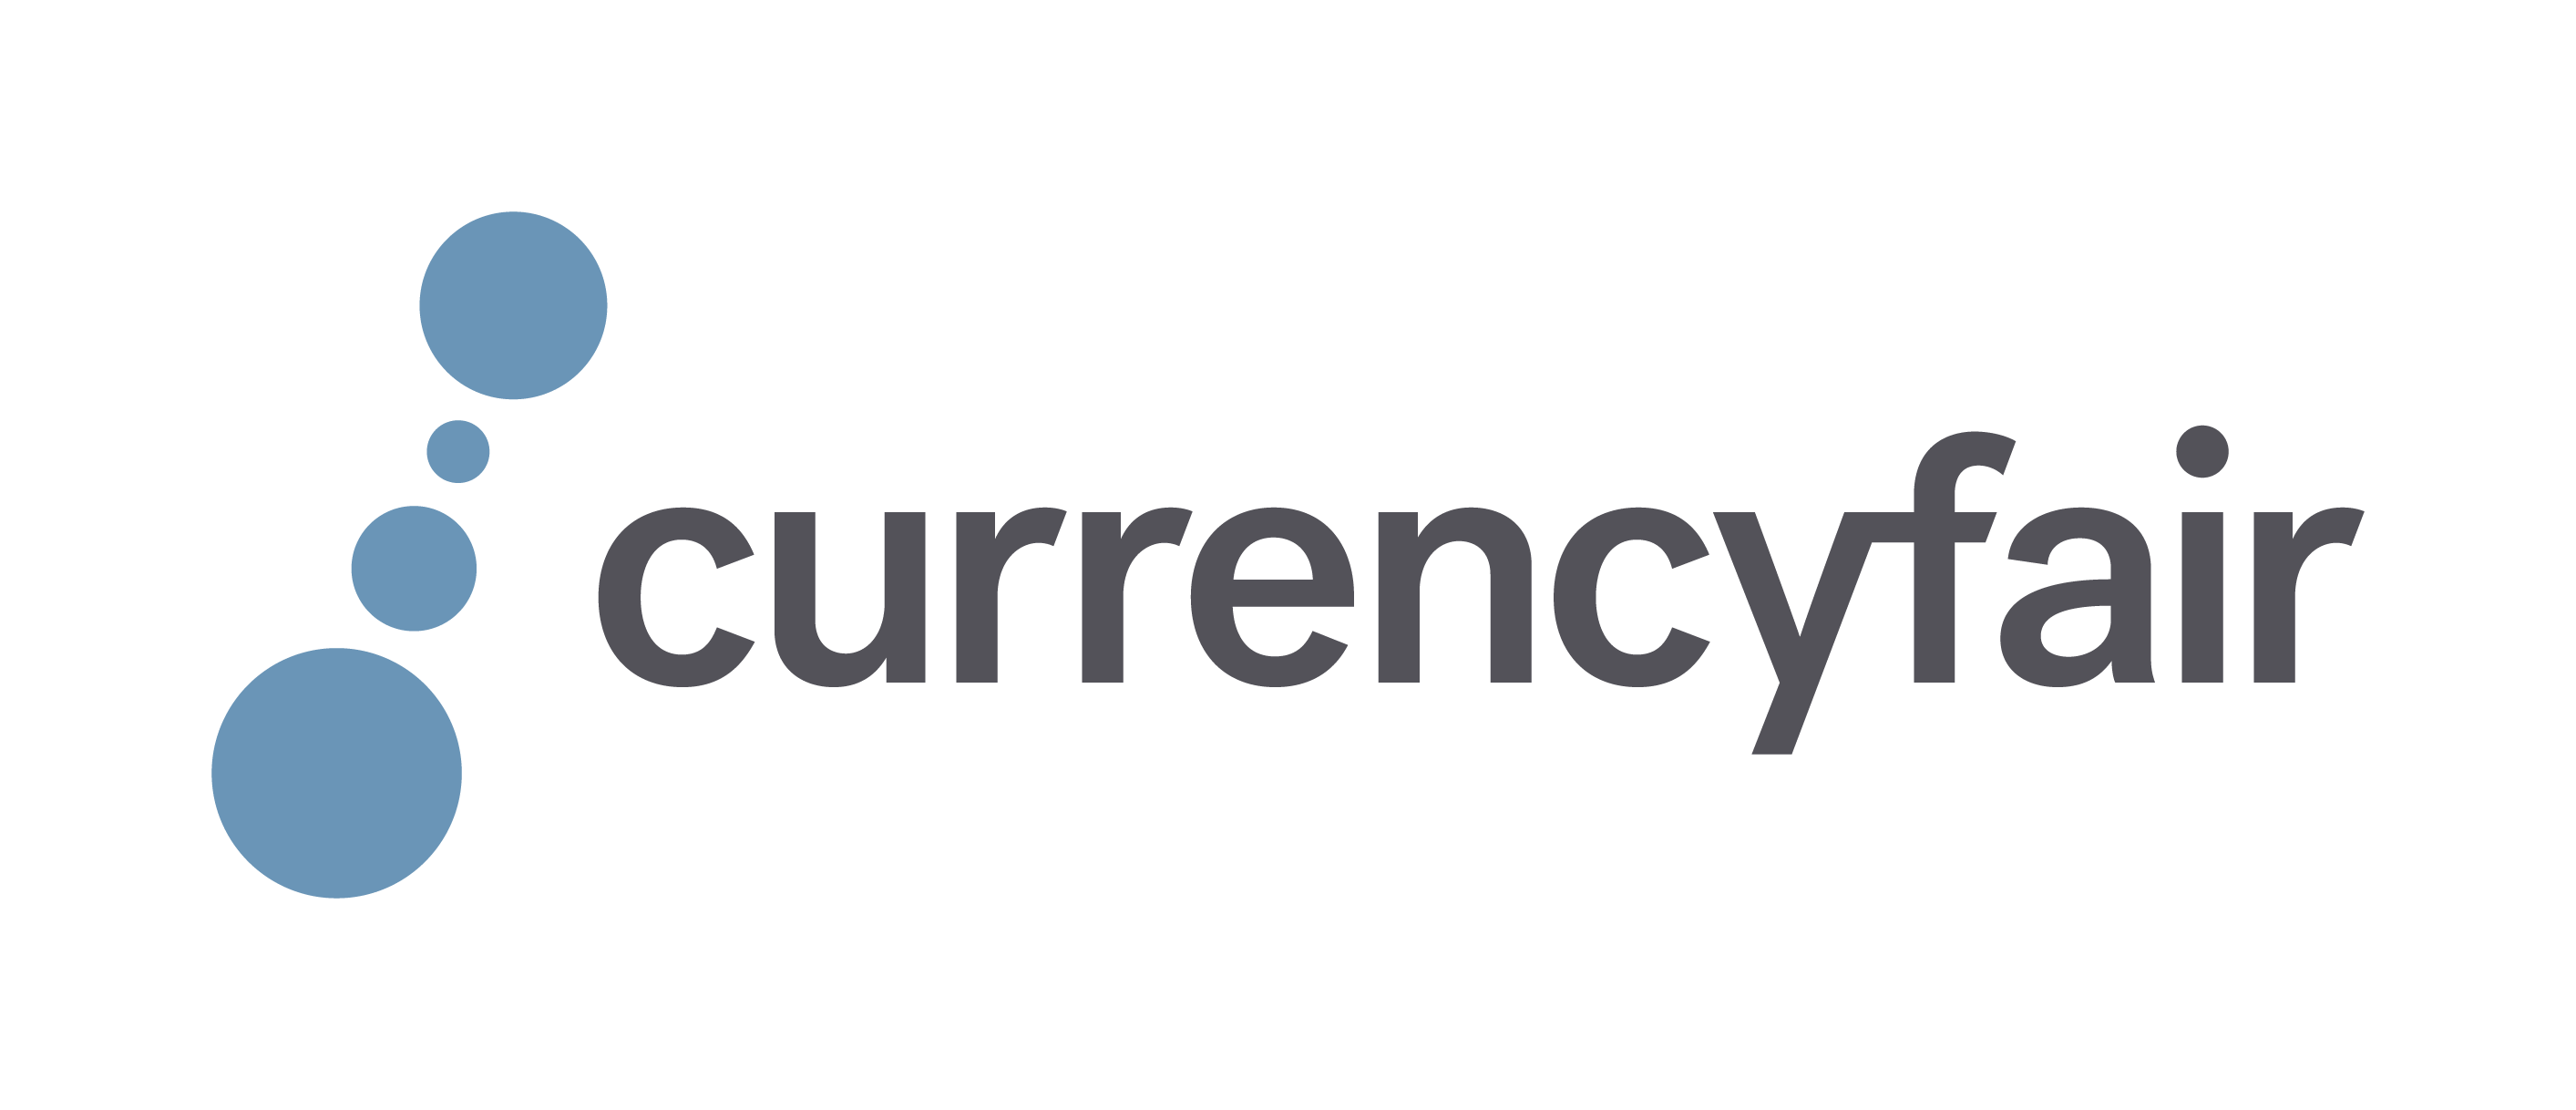 Get started with CurrencyFair